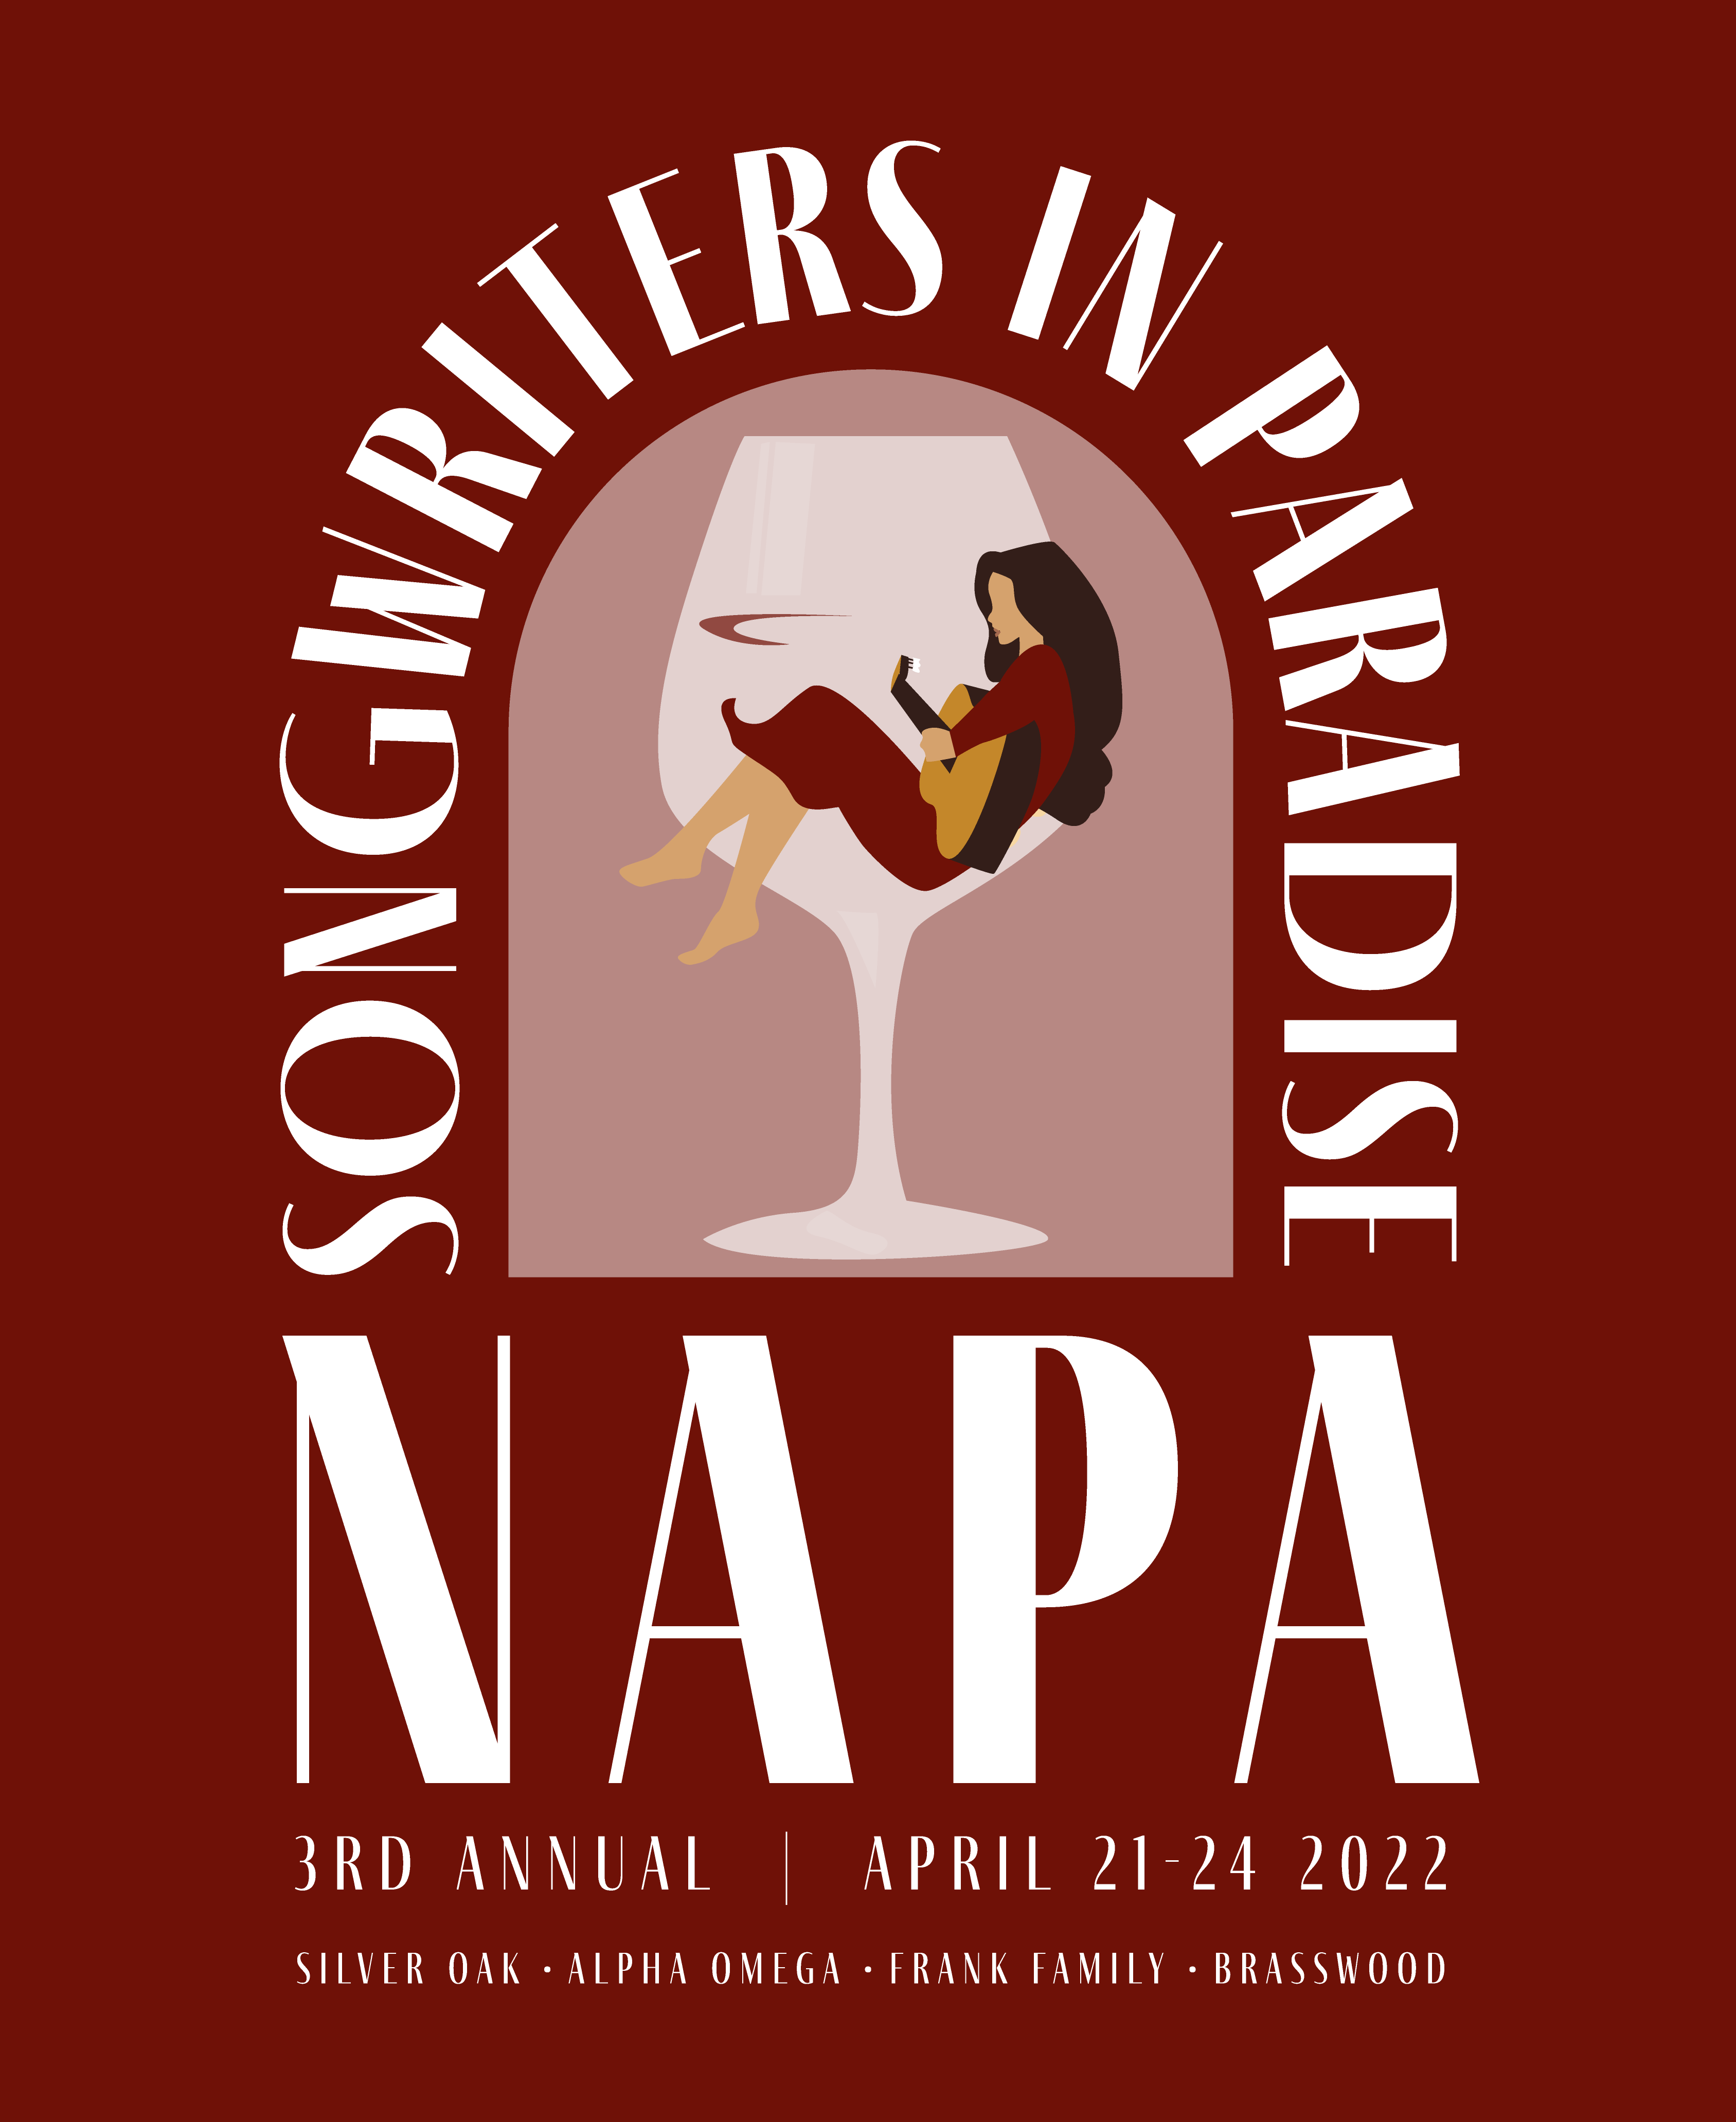 An illustration of a woman sitting in a wine glass, with texting around the perimeter of the illustration that says, "NAPA Songwriters In Paradise", and underneath, details about the event, "3rd Annual | April 21 - 24 2022 Silver Oak • Alpha Omega • Frank Family • Brasswood"